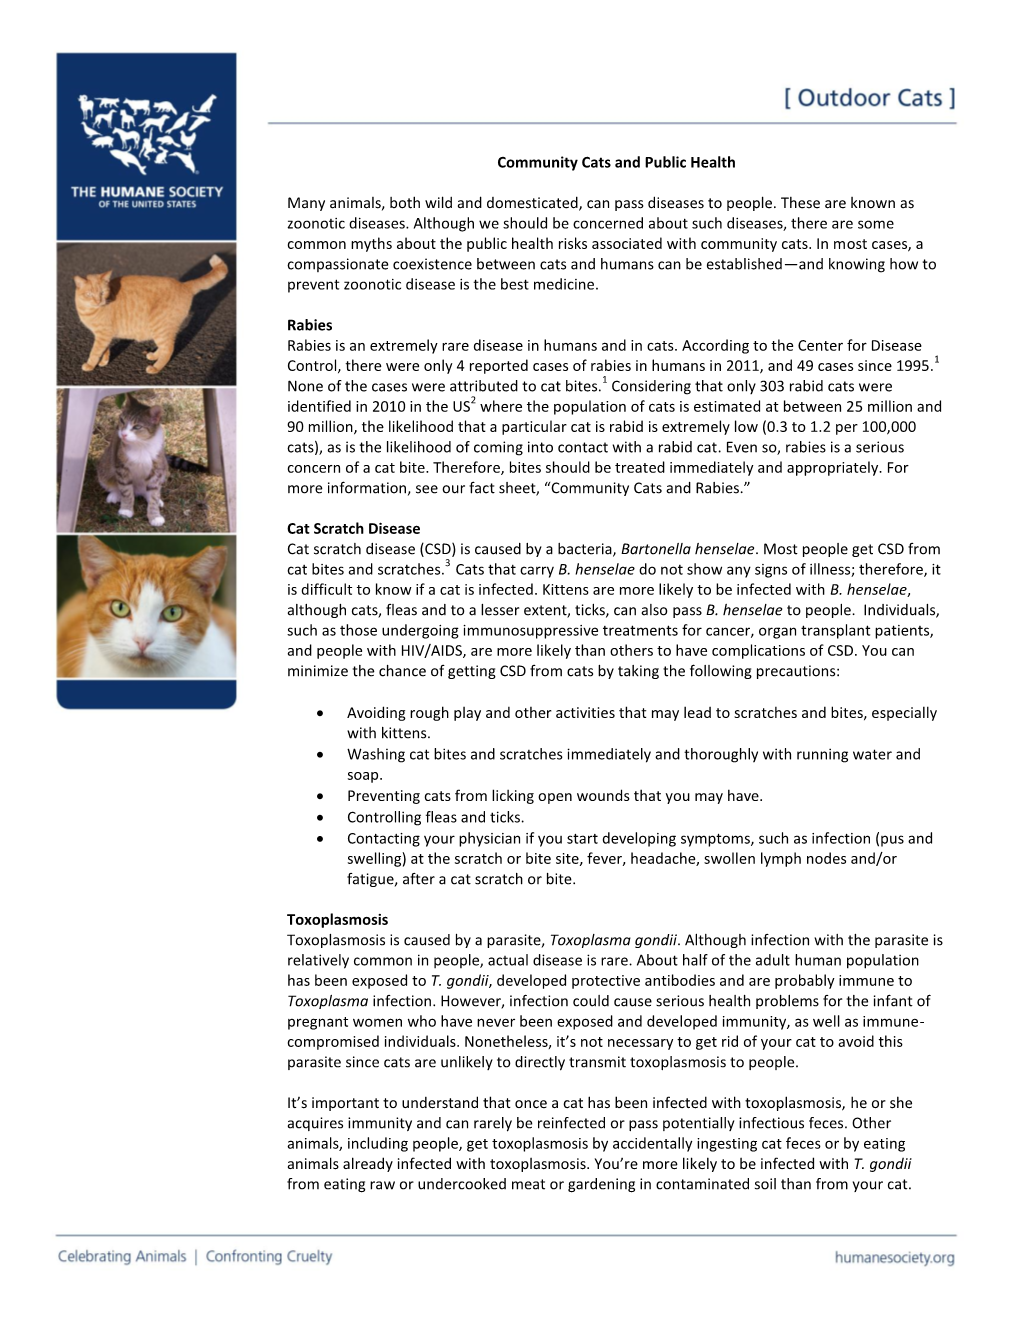 Community Cats and Public Health Many Animals, Both Wild And